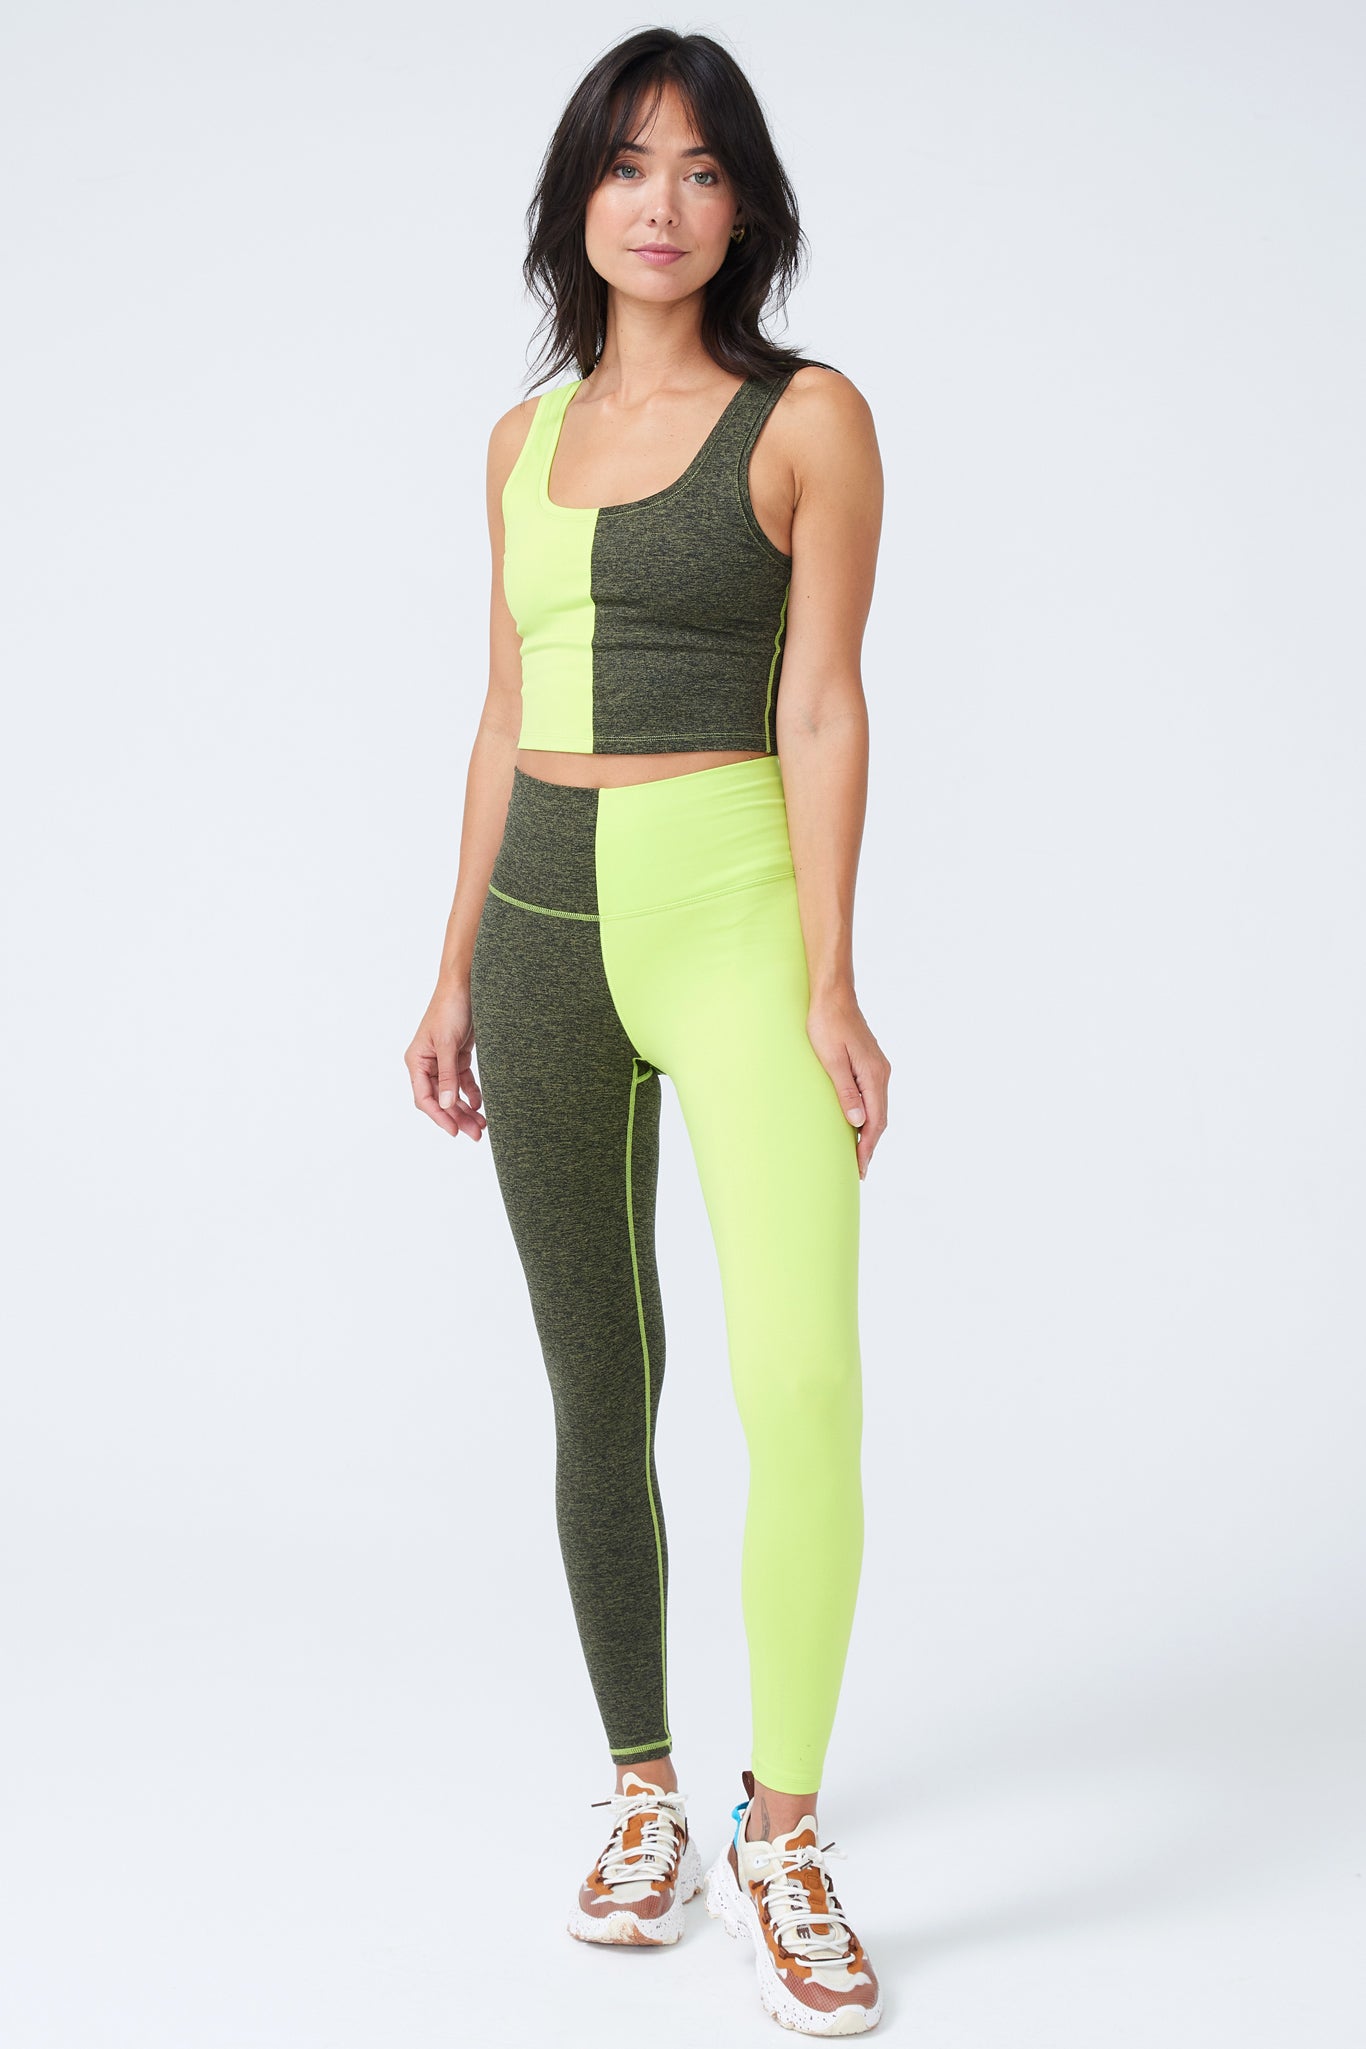 Two Tone TLC Leggings in Uniform Green and Acid Lime